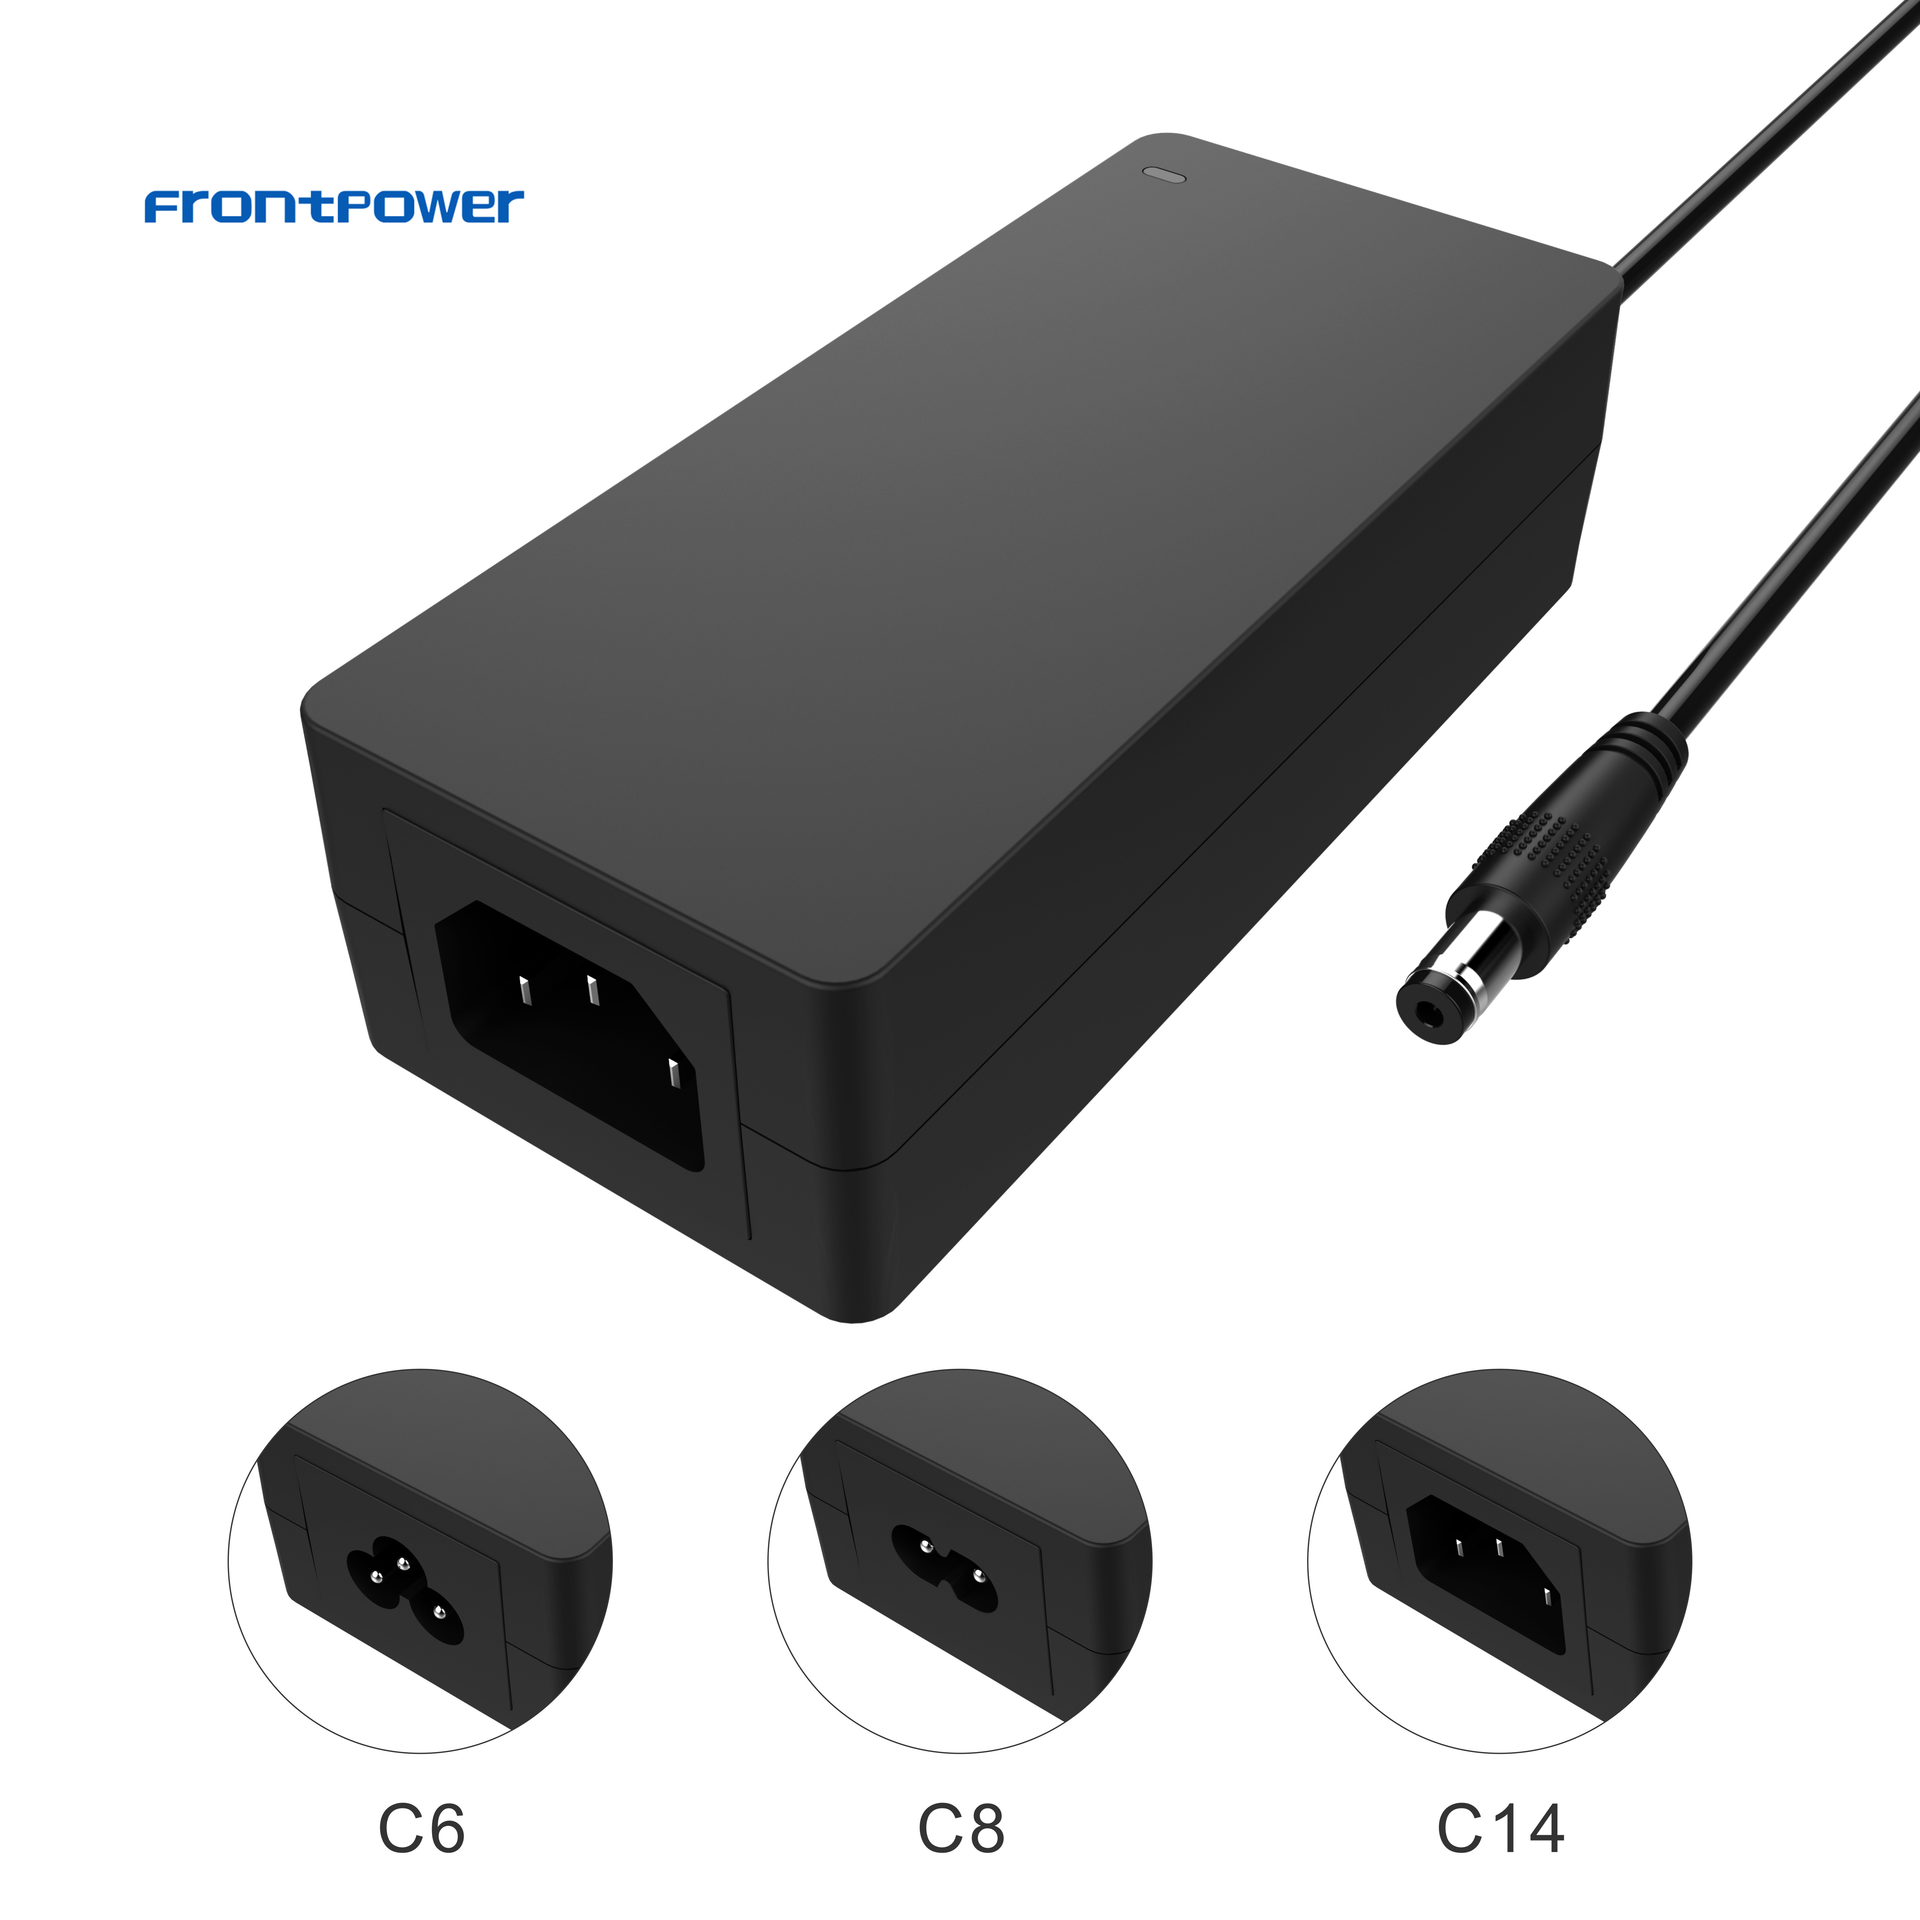 Frontpower power supply 12V 3.33A laptop power adapter with UL FCC ROHS CB CE GS UKCA SAA CCC BIS for player